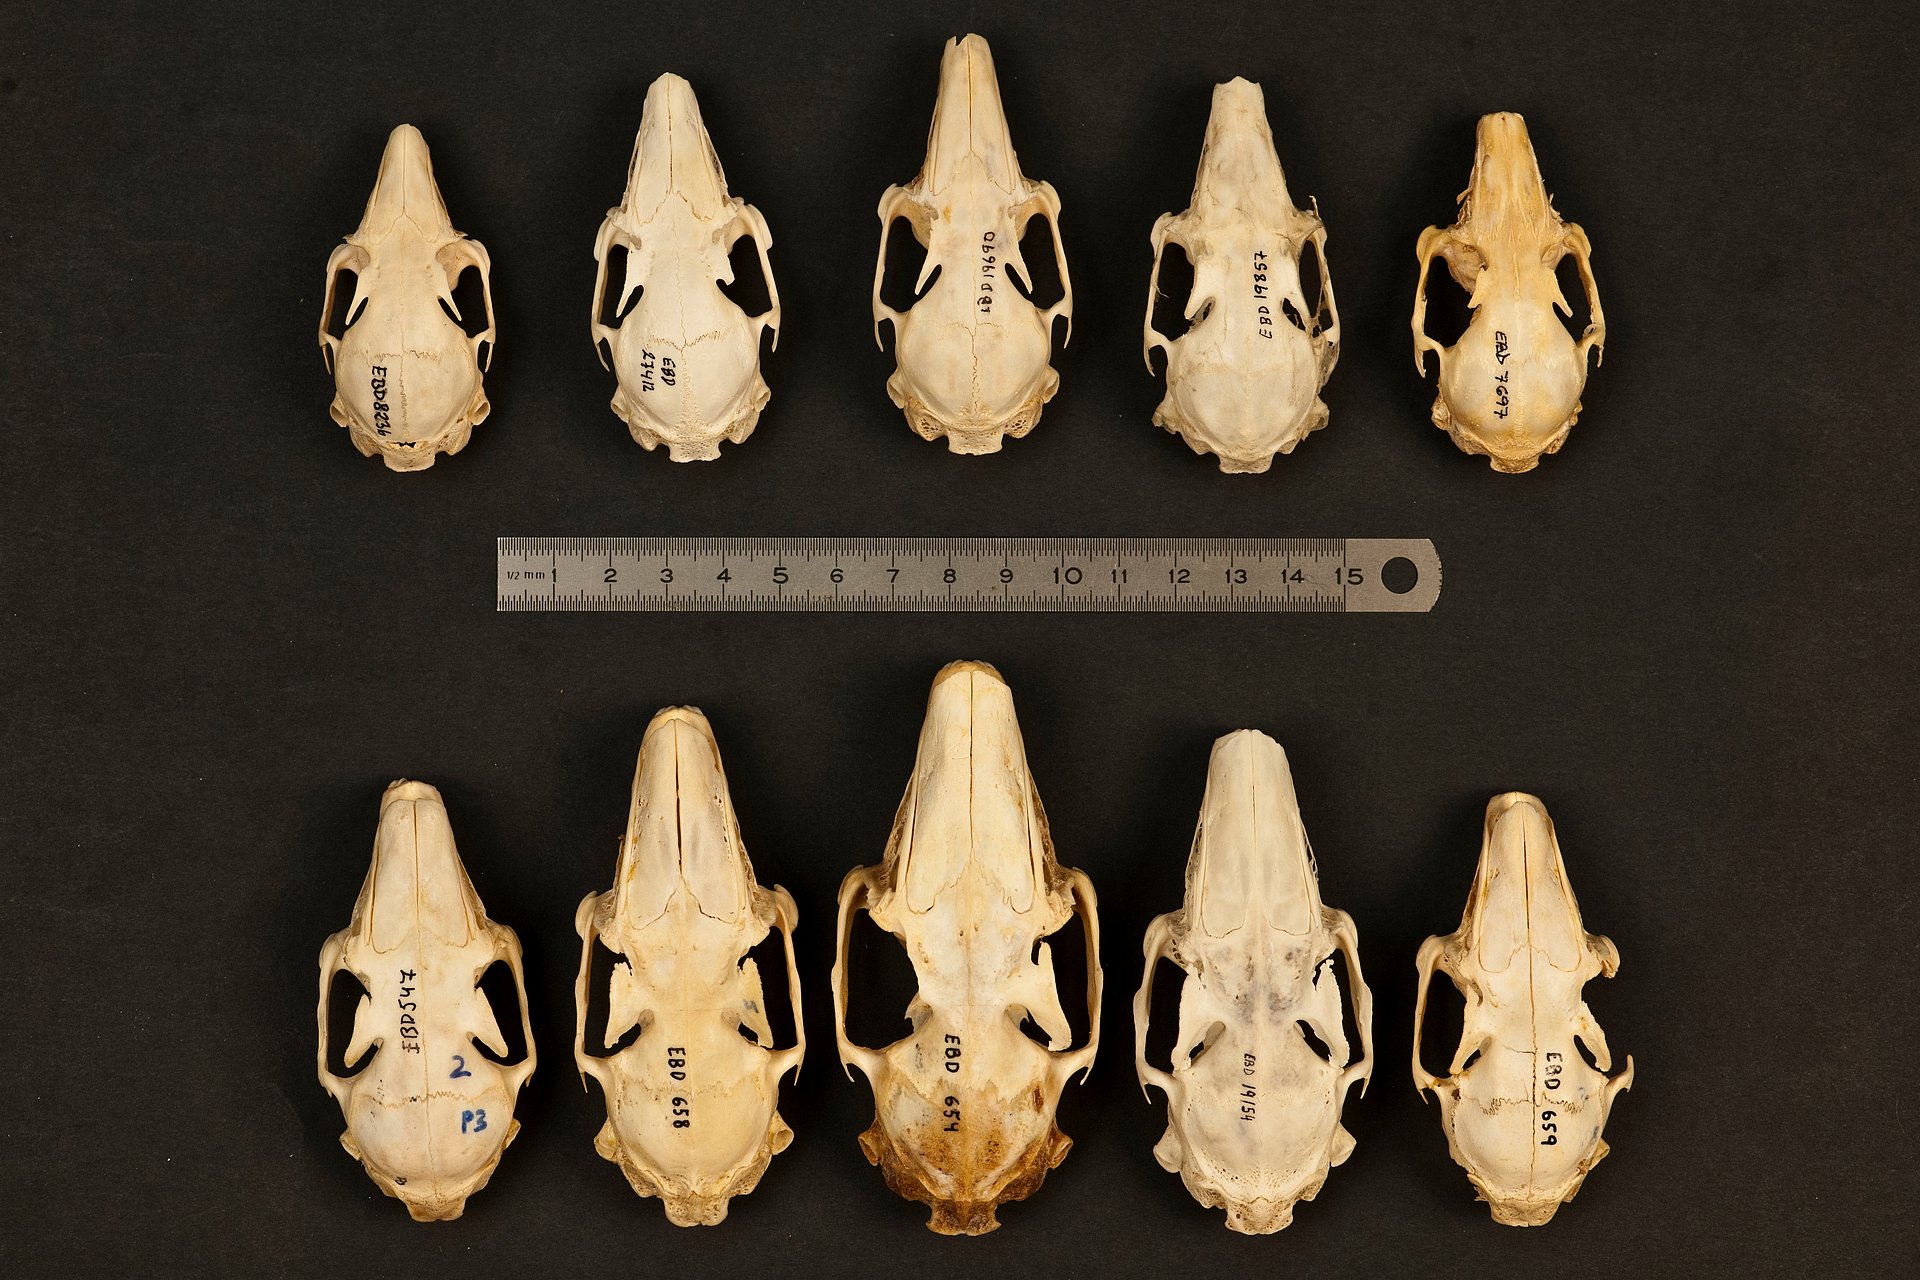 Many mammal species are highly variable in their body size, here illustrated by the sizes of rabbit (upper row) and hare (lower row) skulls. The picture was taken with skulls from the collection of the Estación Biológica de Doñana-CSIC, Sevilla, Spain.